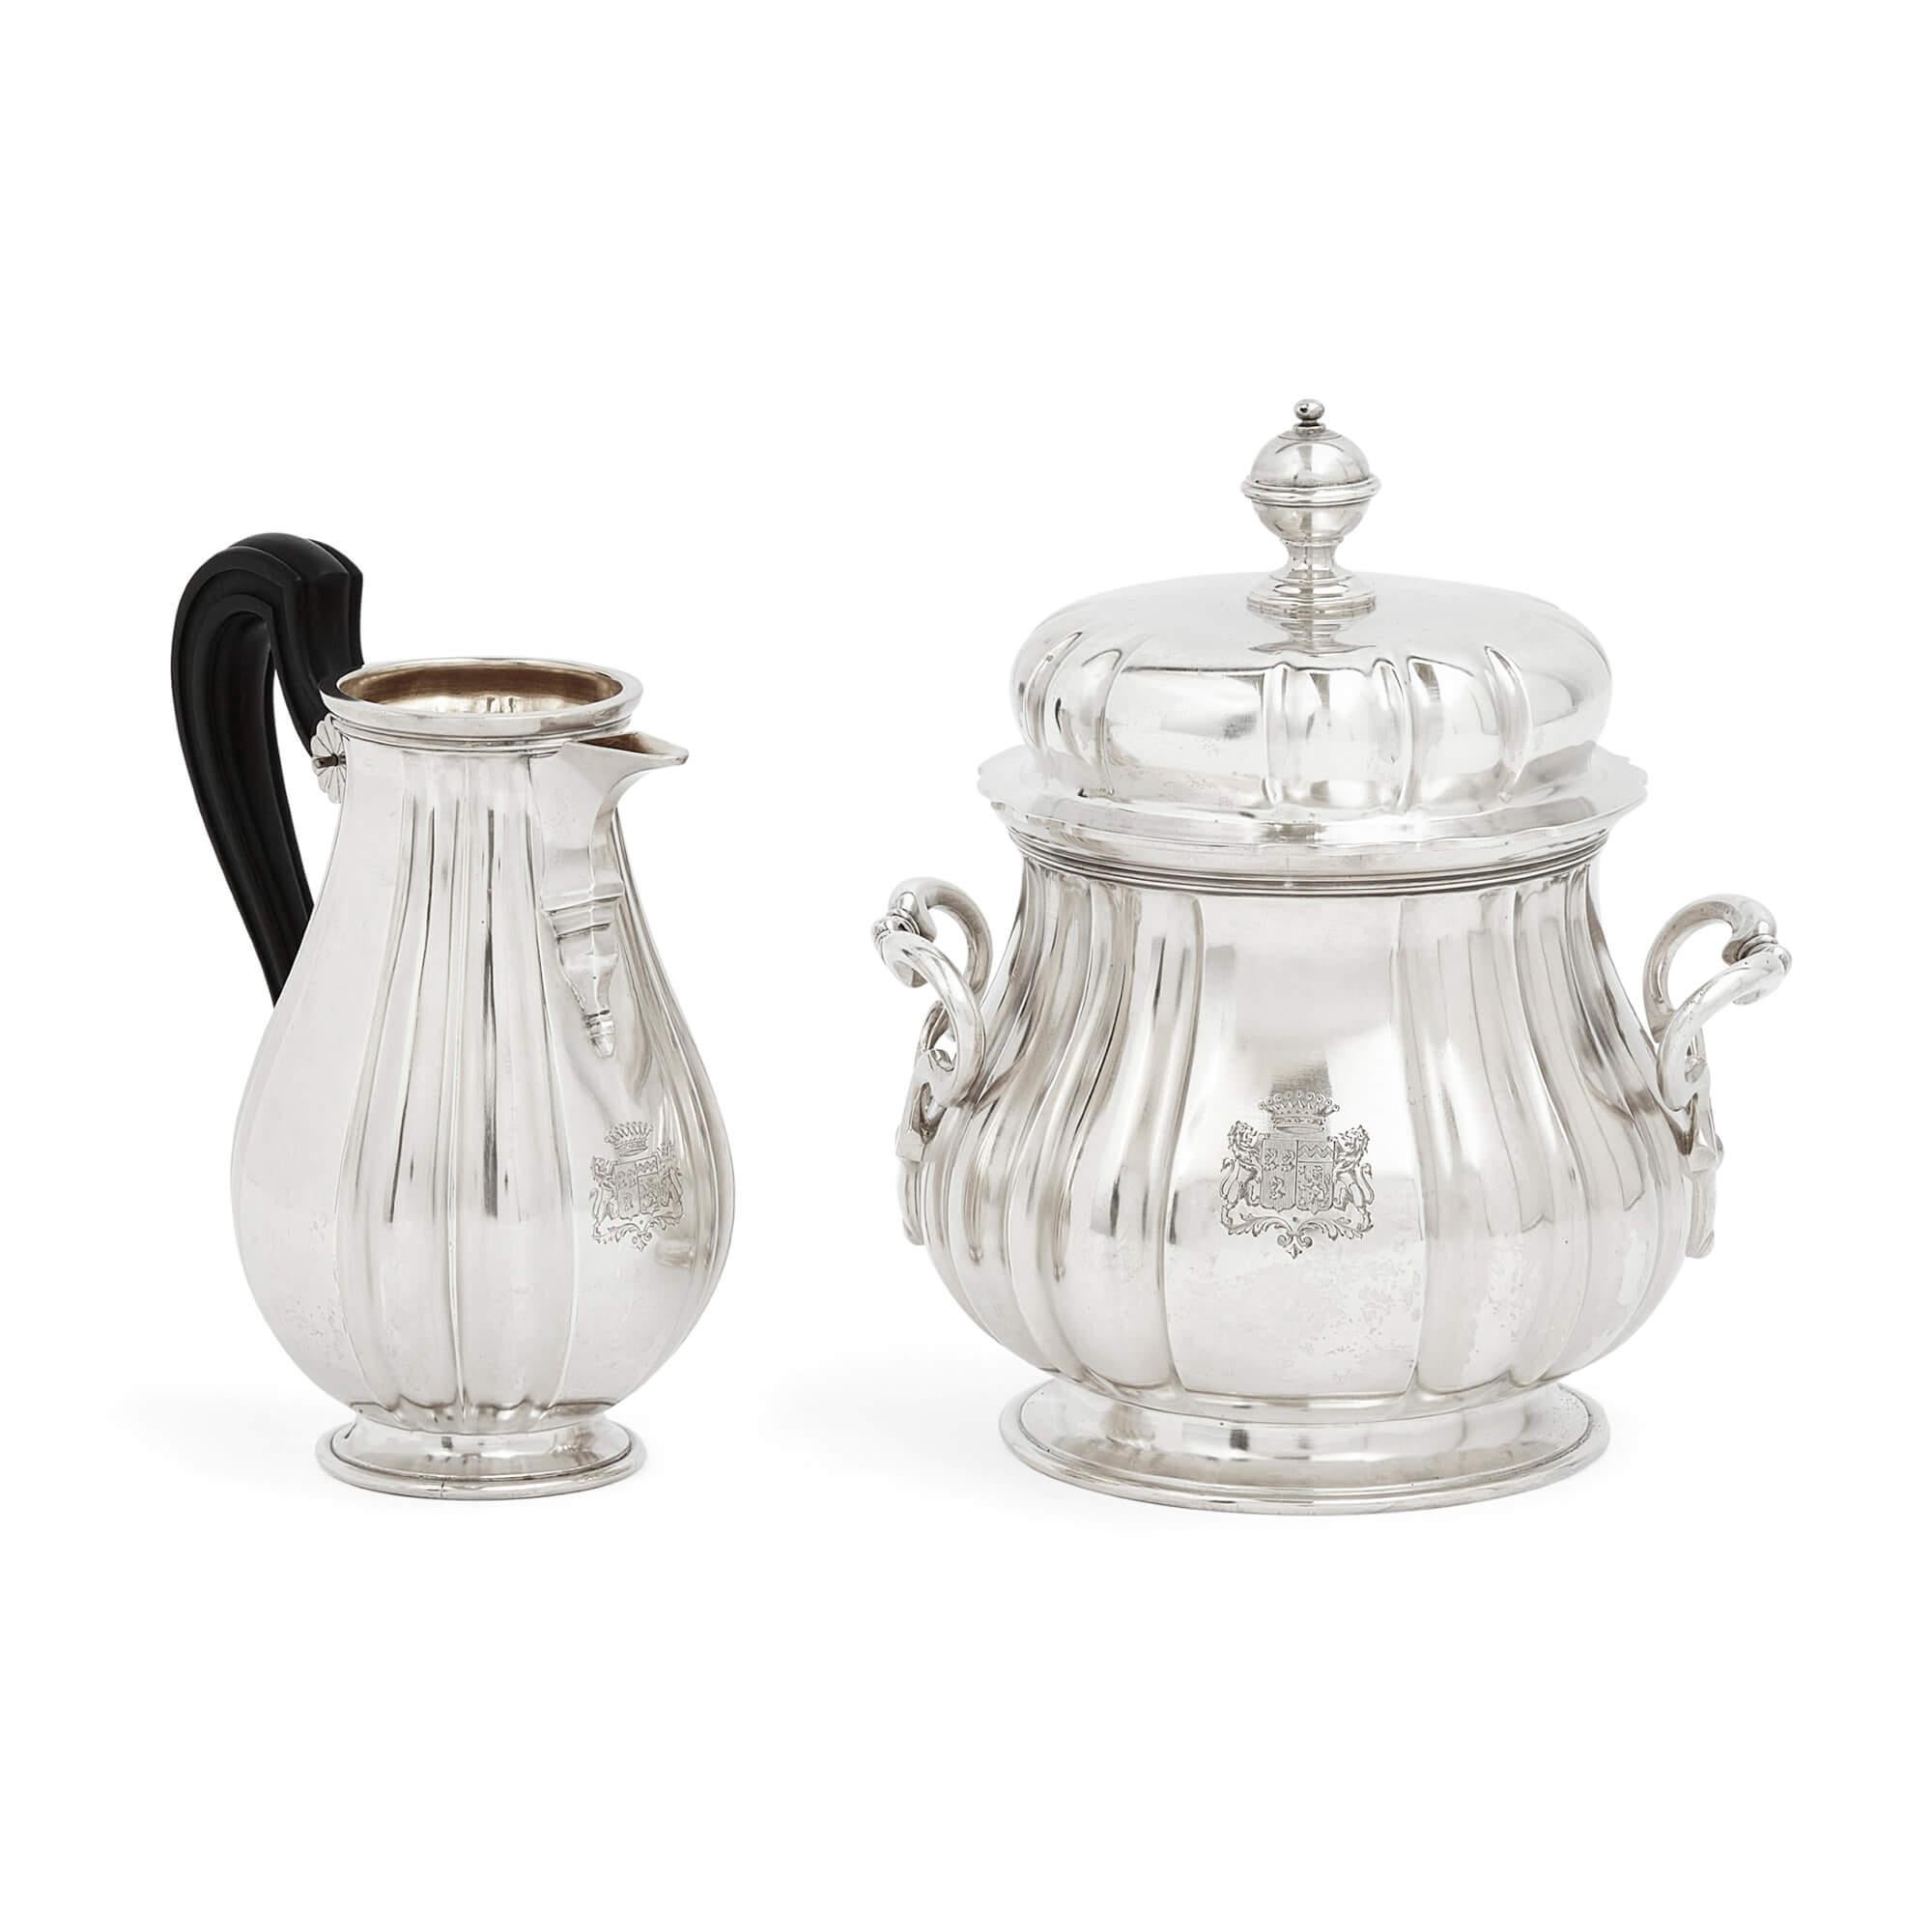 20th Century Silver and Silver-Plate Tea and Coffee Set by Cardeilhac For Sale